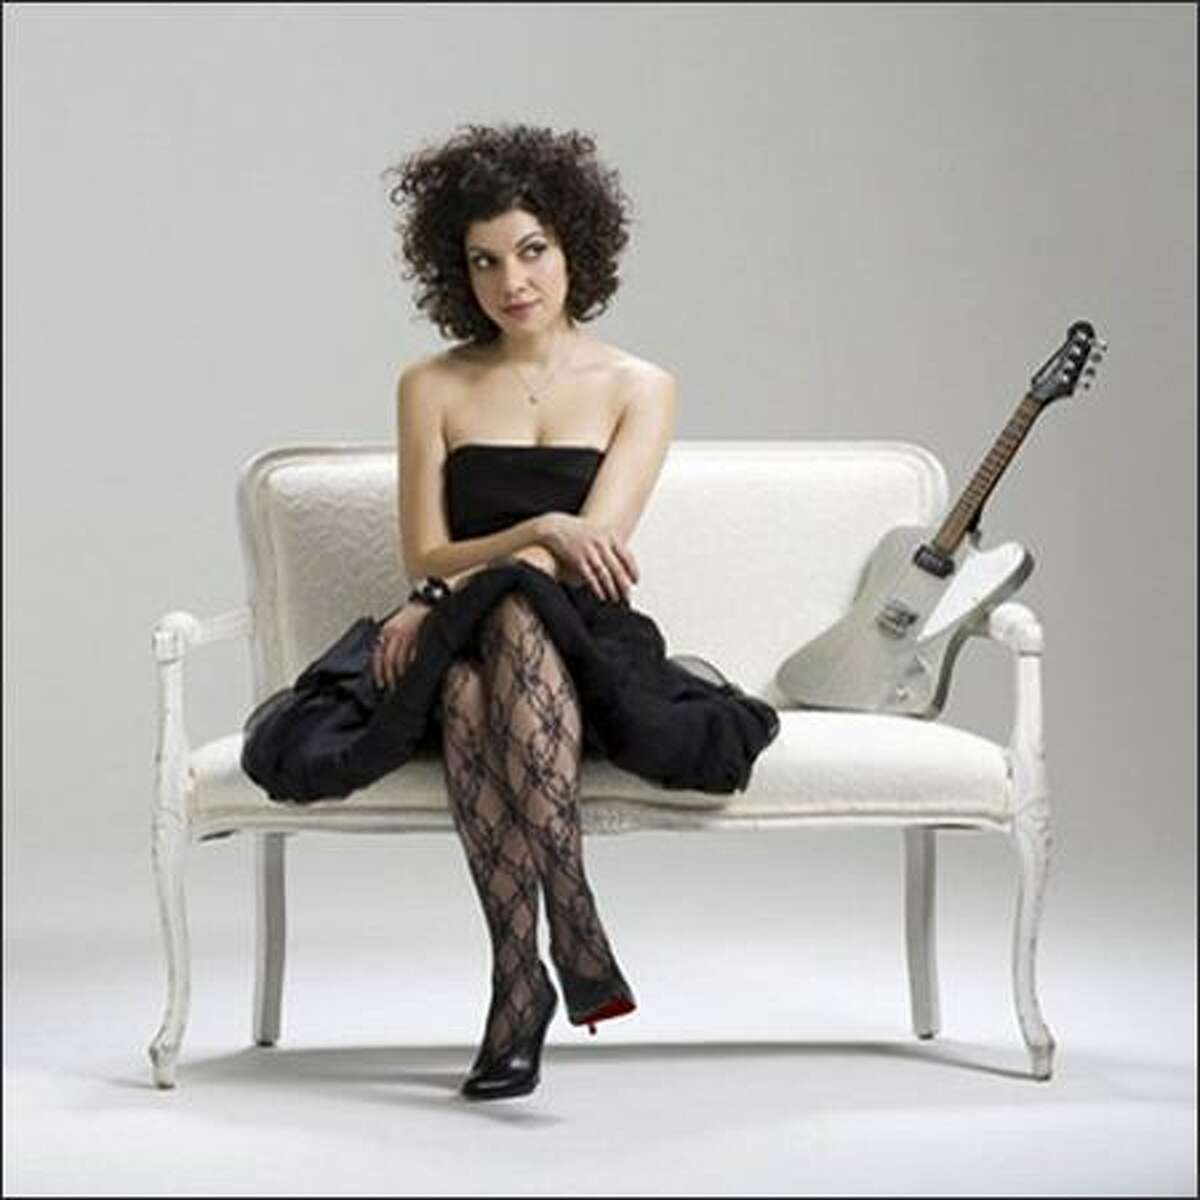 Carrie Rodriguez’s current album, “She Ain’t Me,” blends folk, rock and bluegrass.